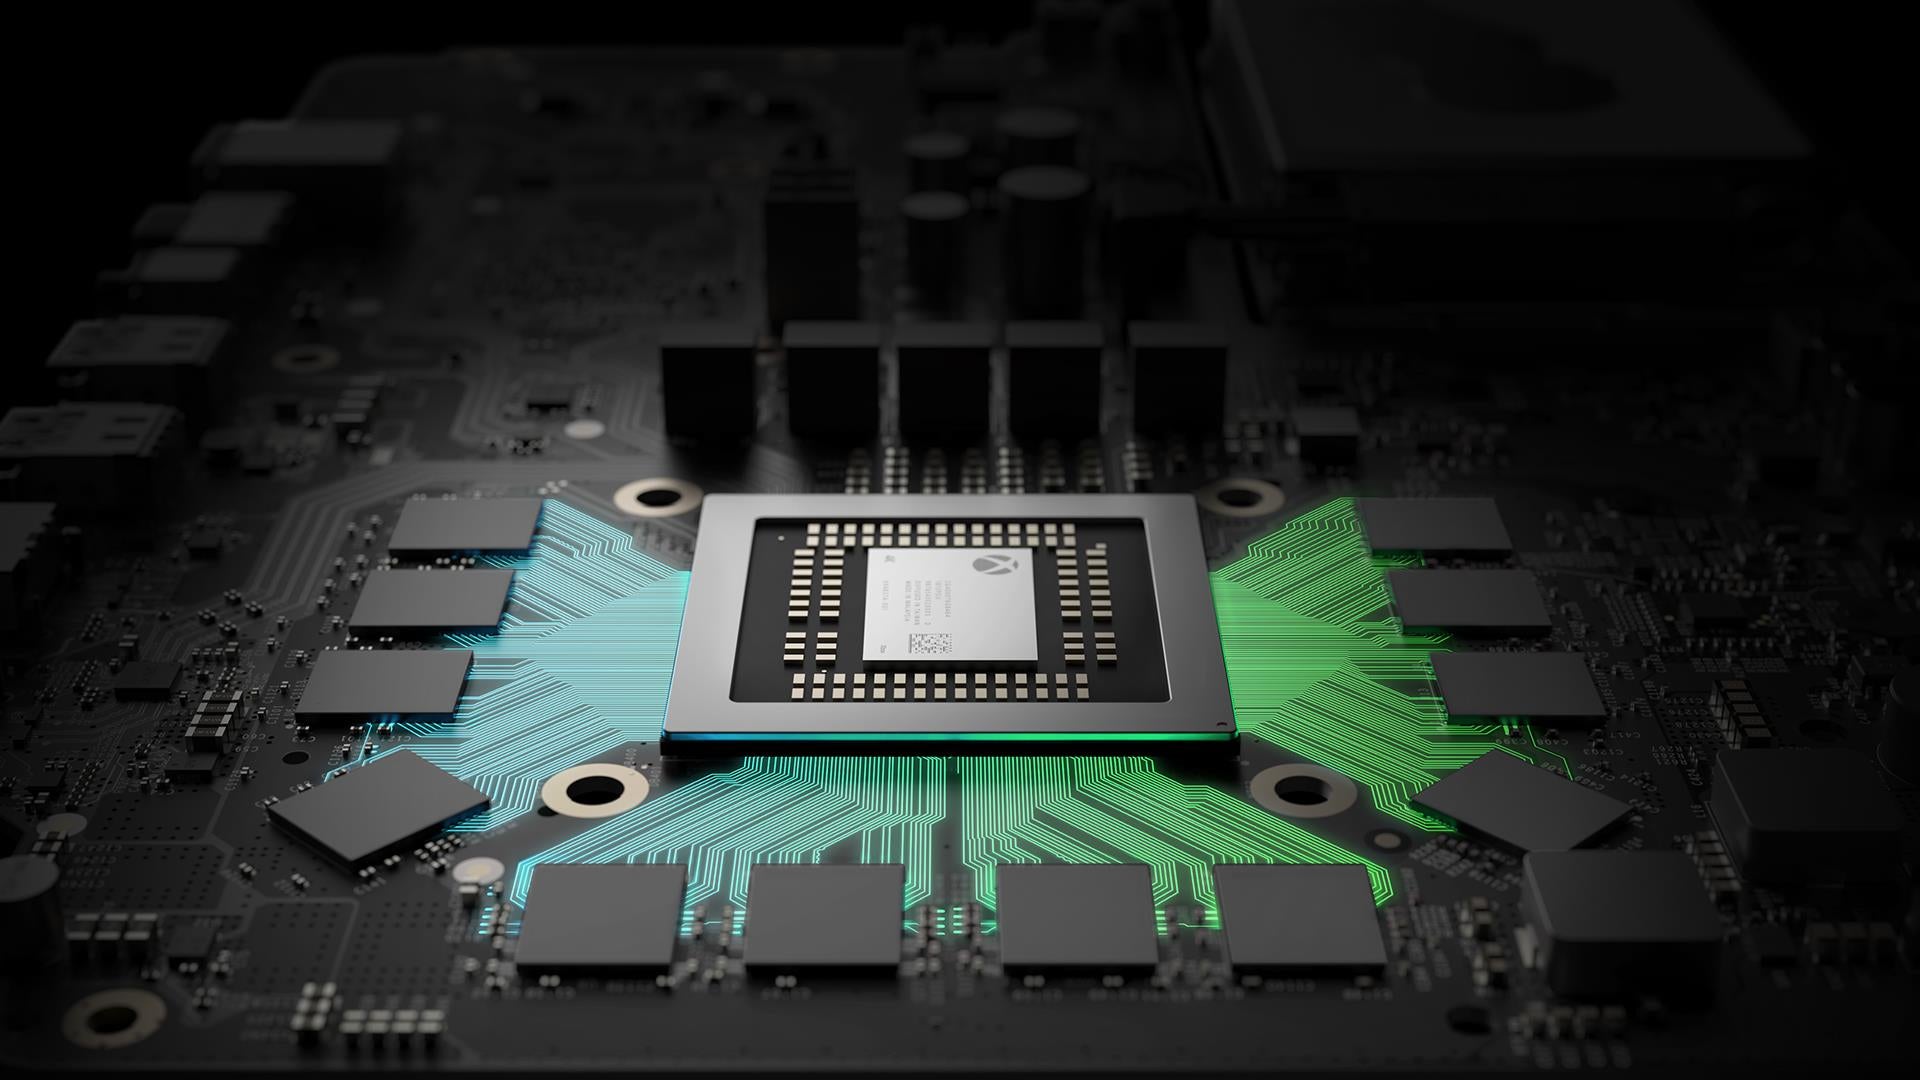 Image for Microsoft may have hidden Xbox Scorpio's release date and a sick burn on Sony in its E3 teasers